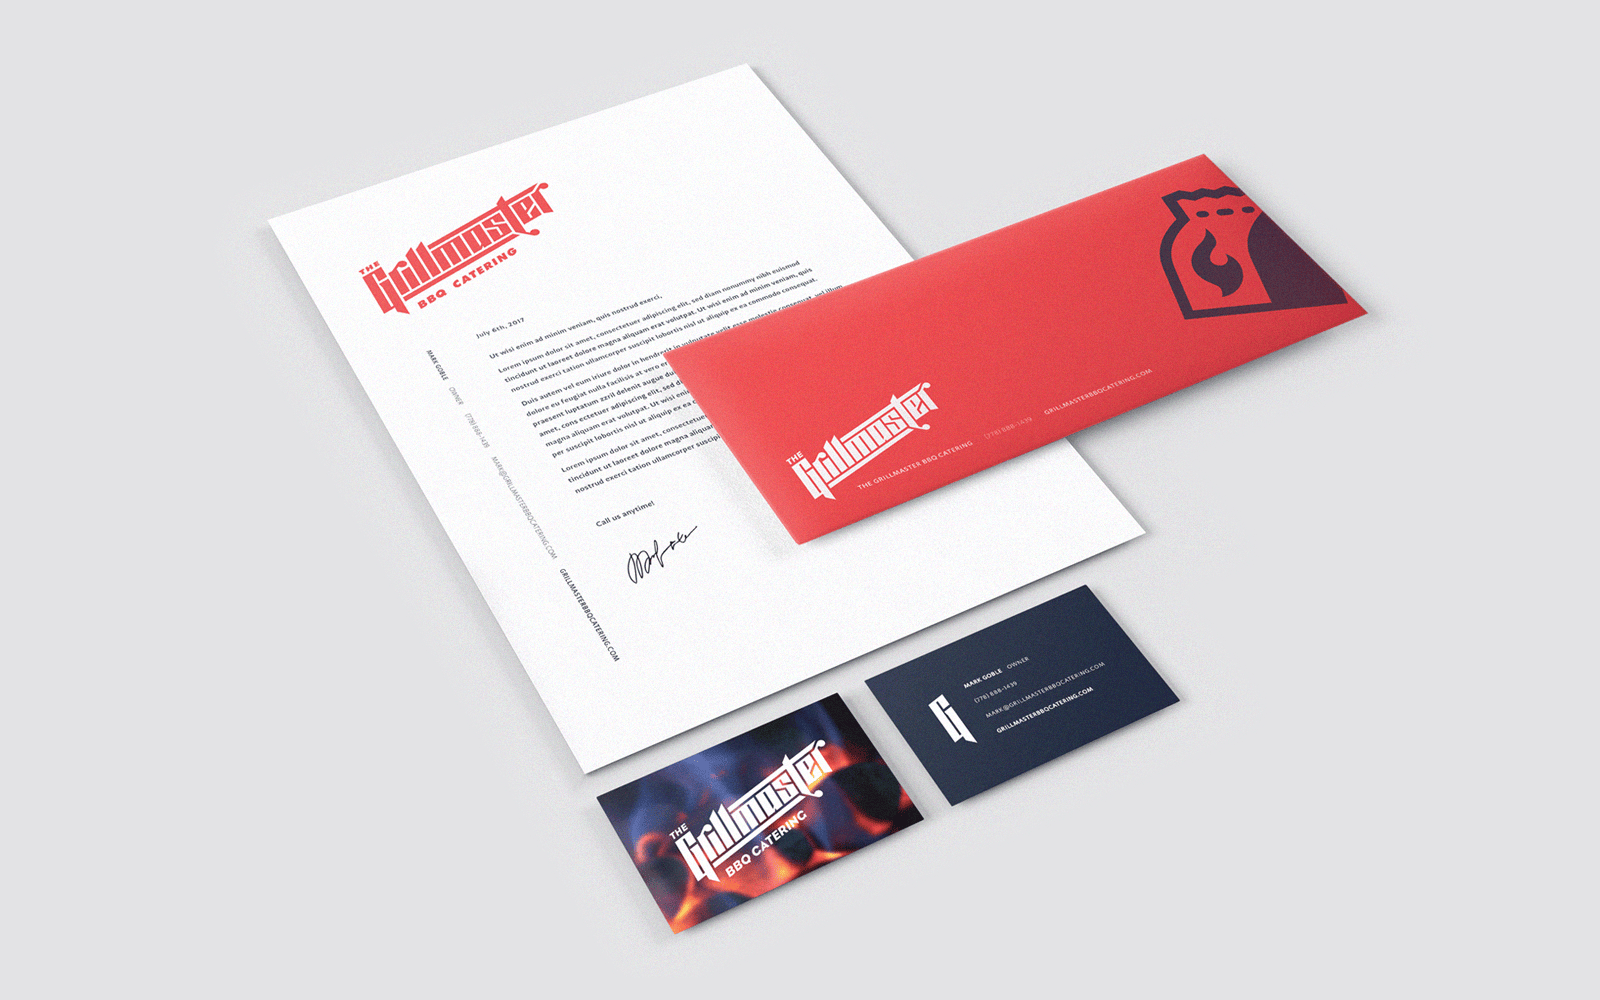 The Grillmaster BBQ & Catering Stationary